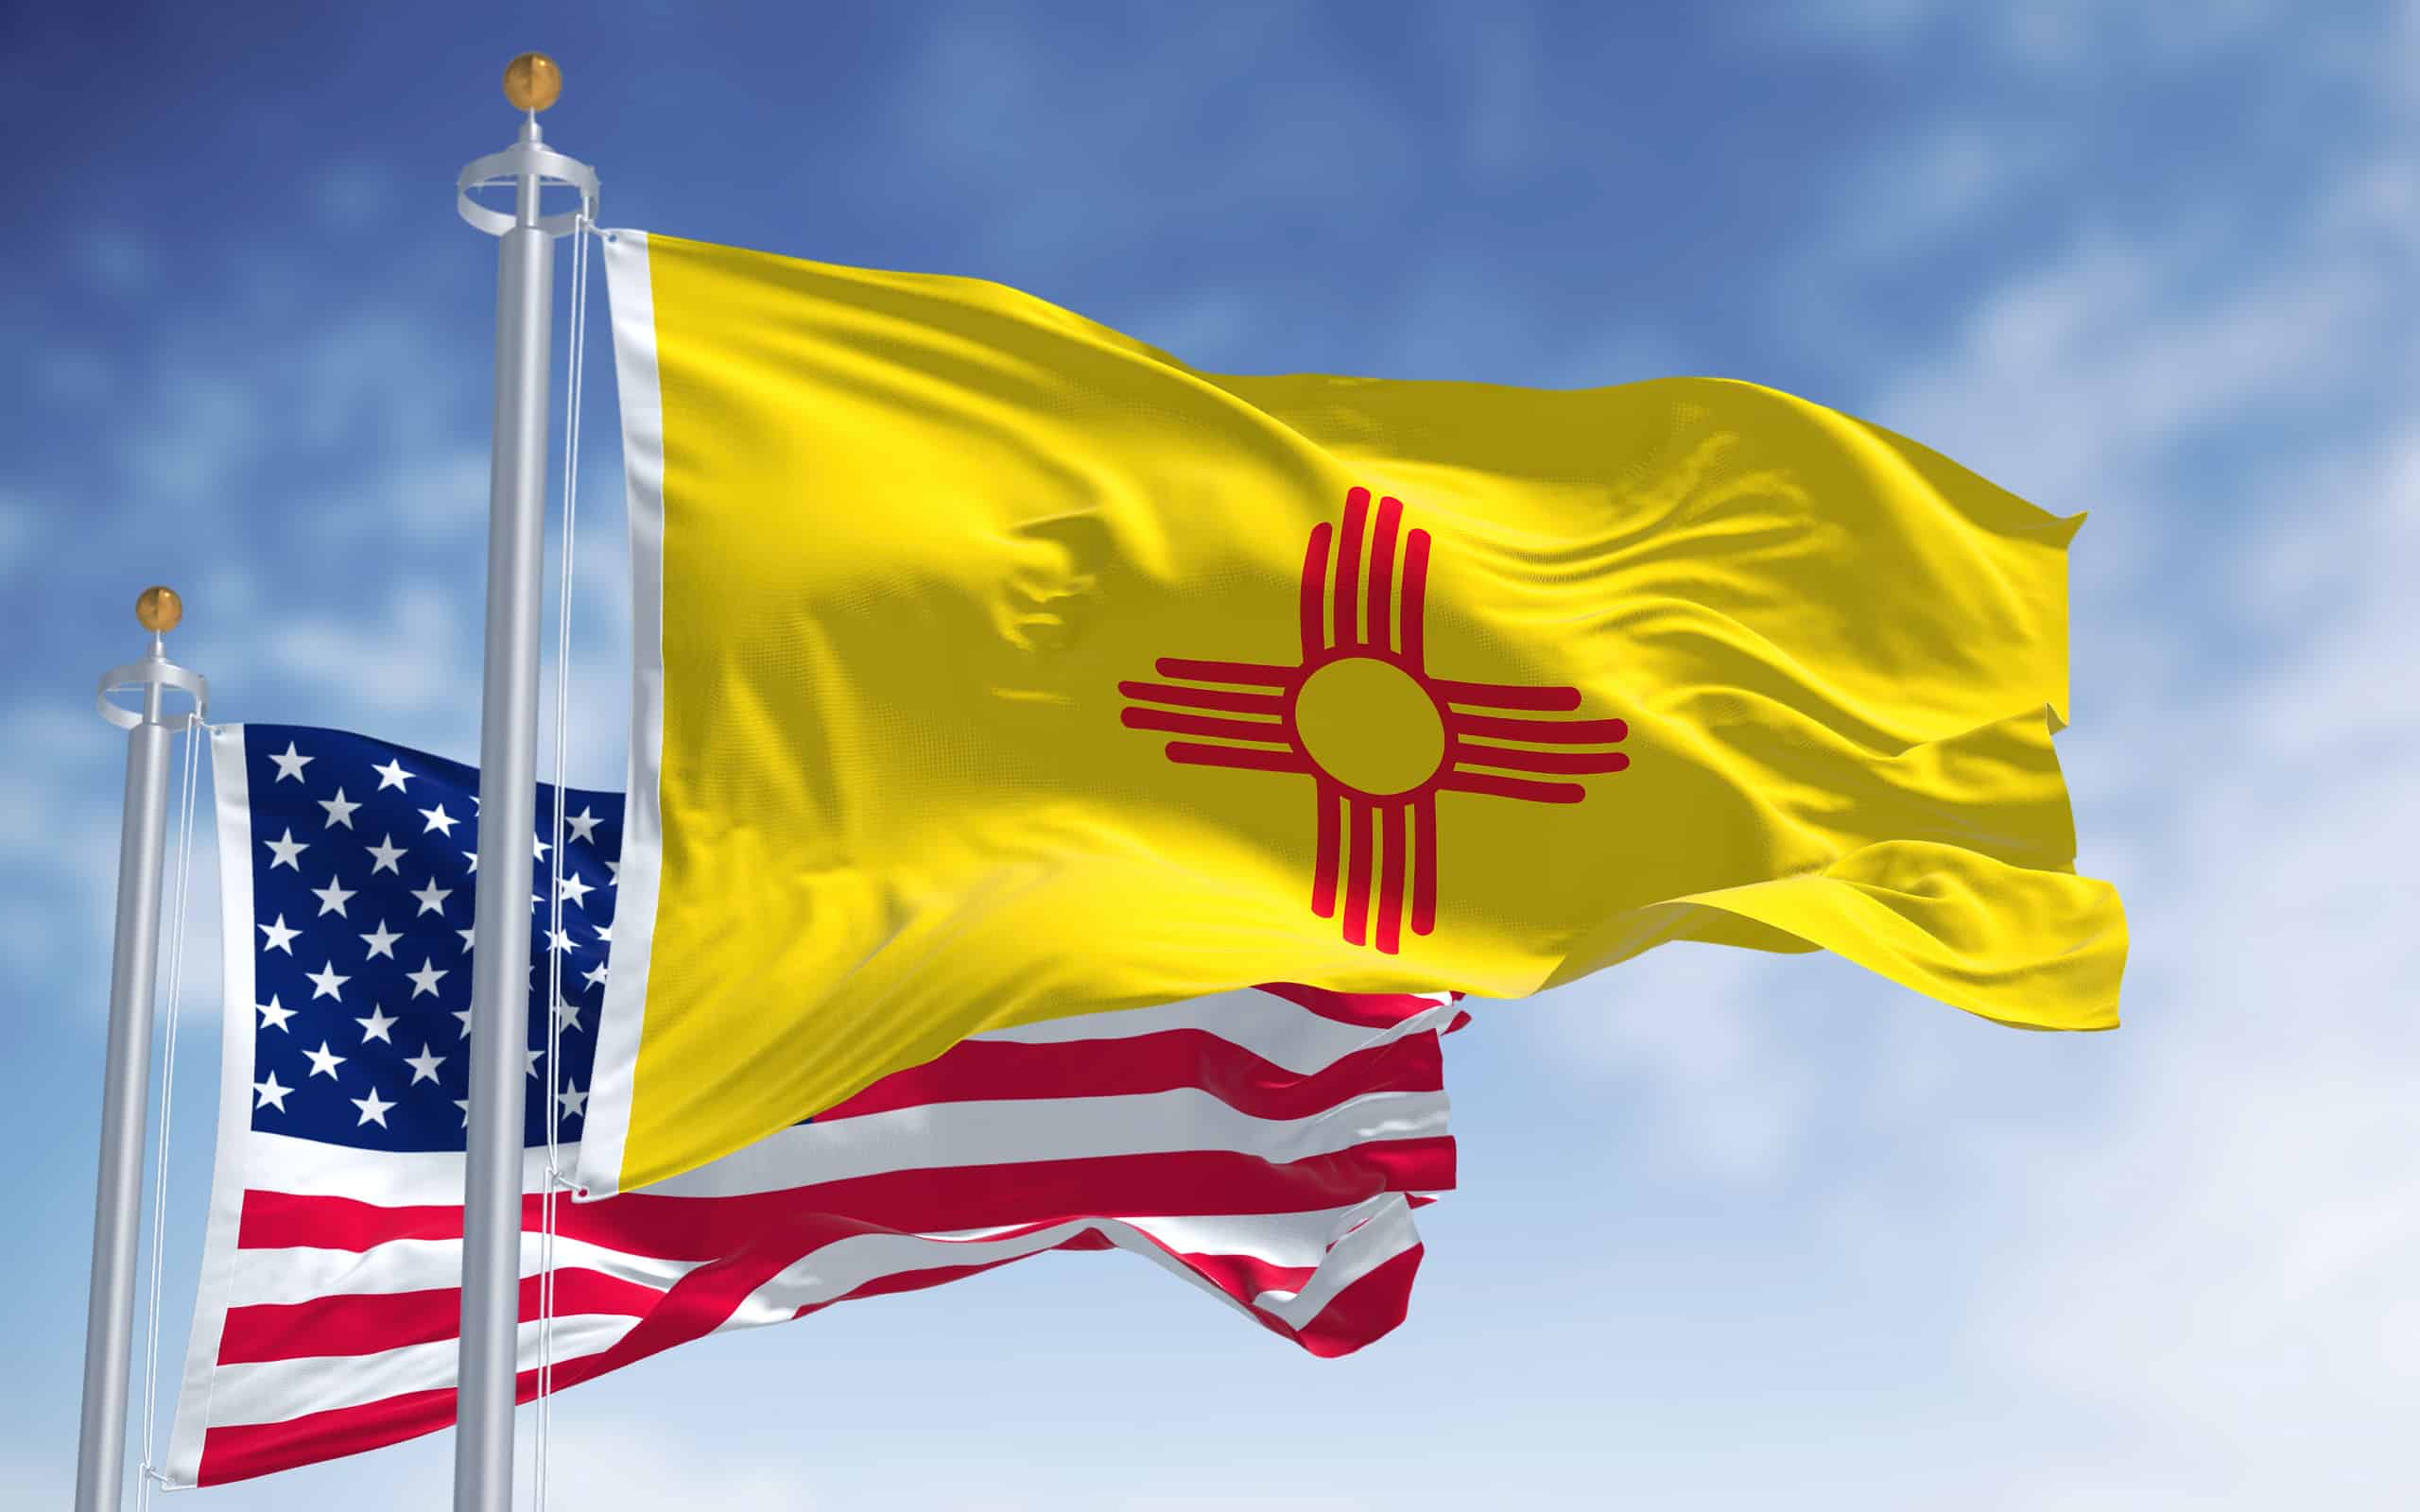 The New Mexico state flag waving along with the national flag of the United States of America